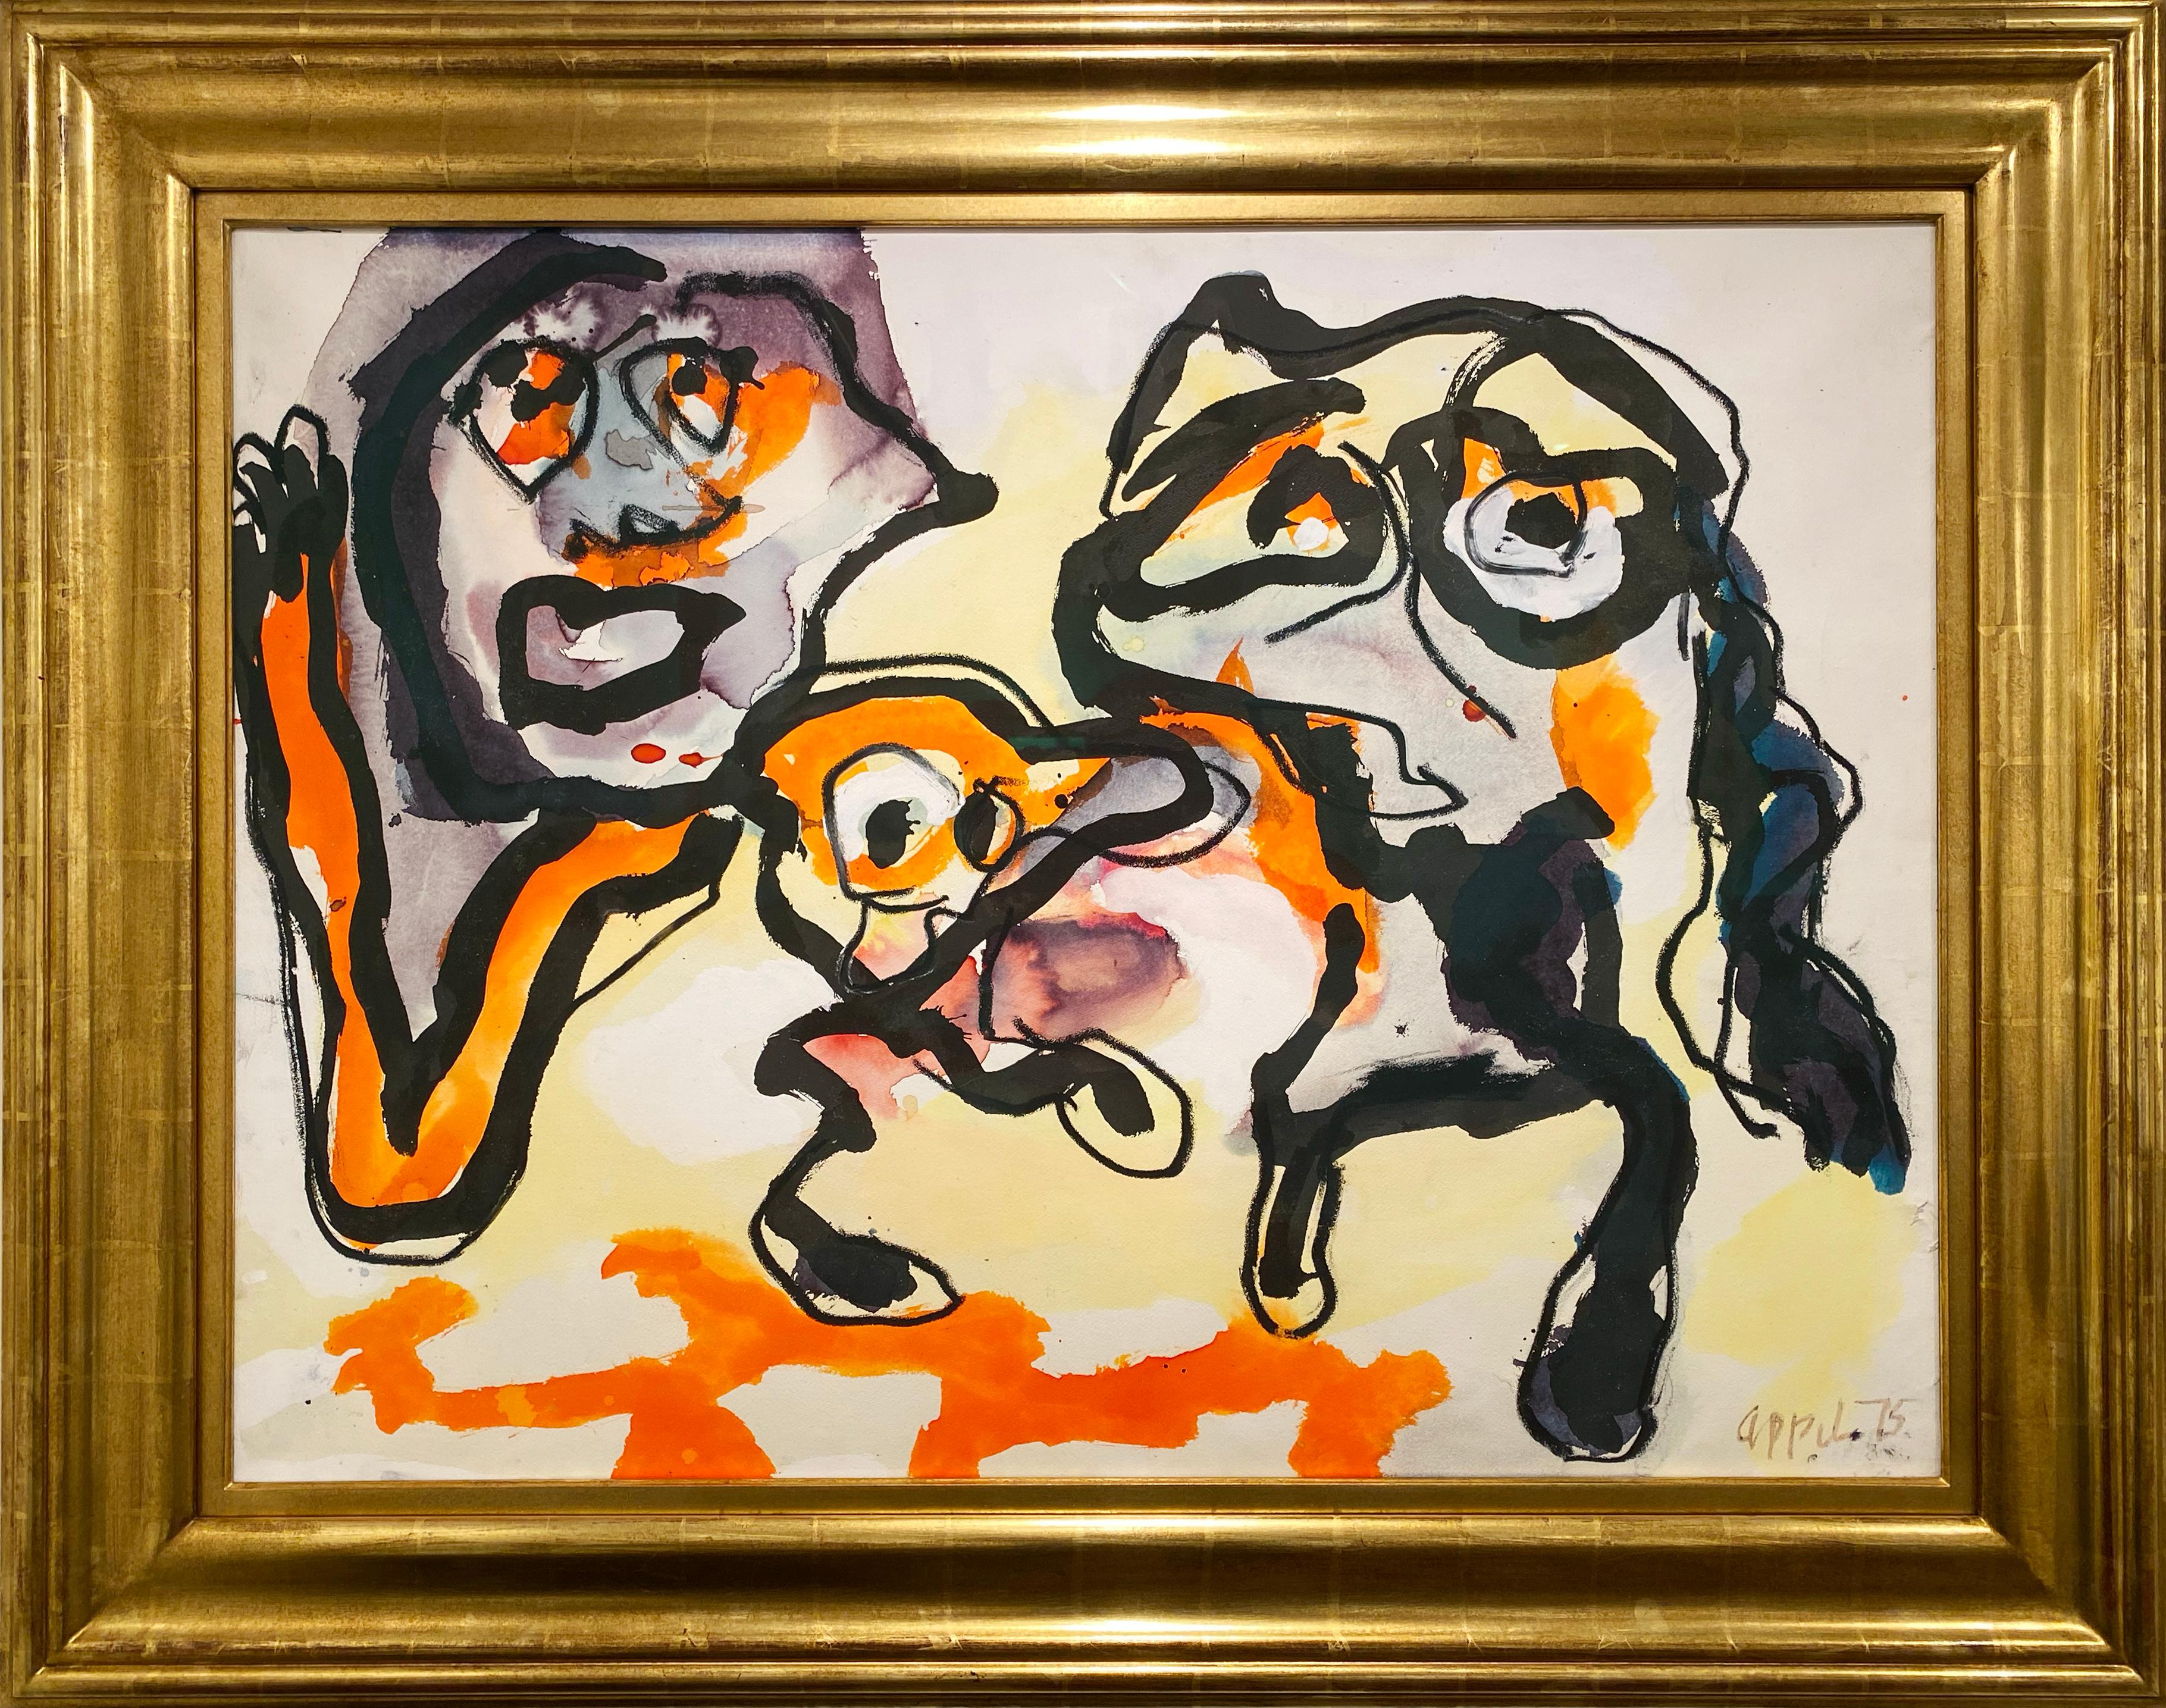 Abstract Painting Karel Appel - Figures, visages abstraits